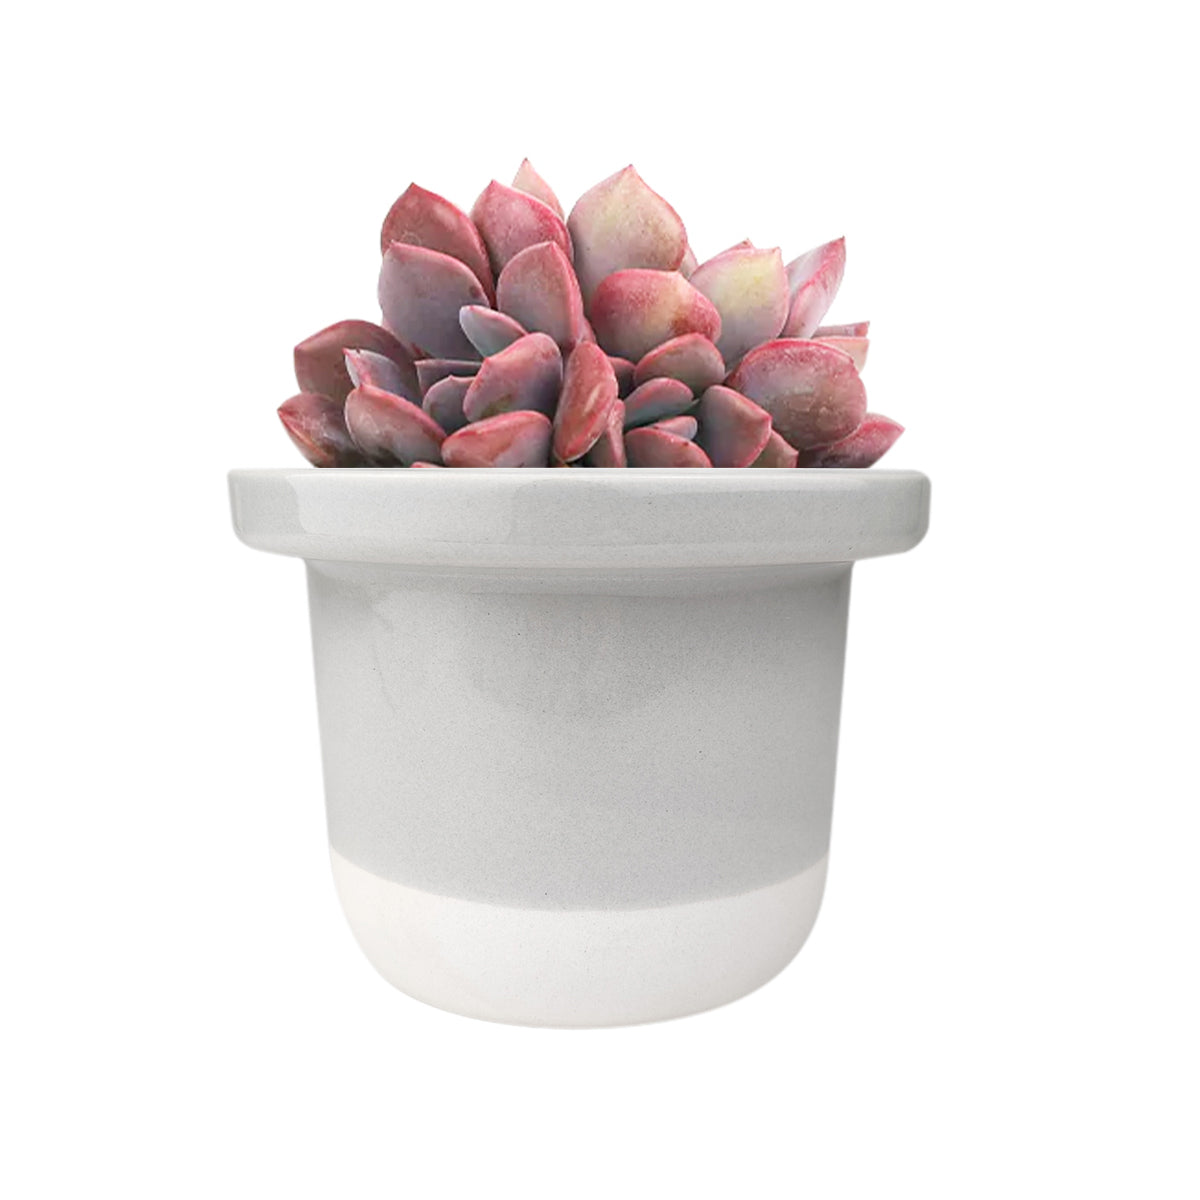 Grey And White Ceramic Pot, unique planters, pots for succulents and cacti, modern pots for home decor